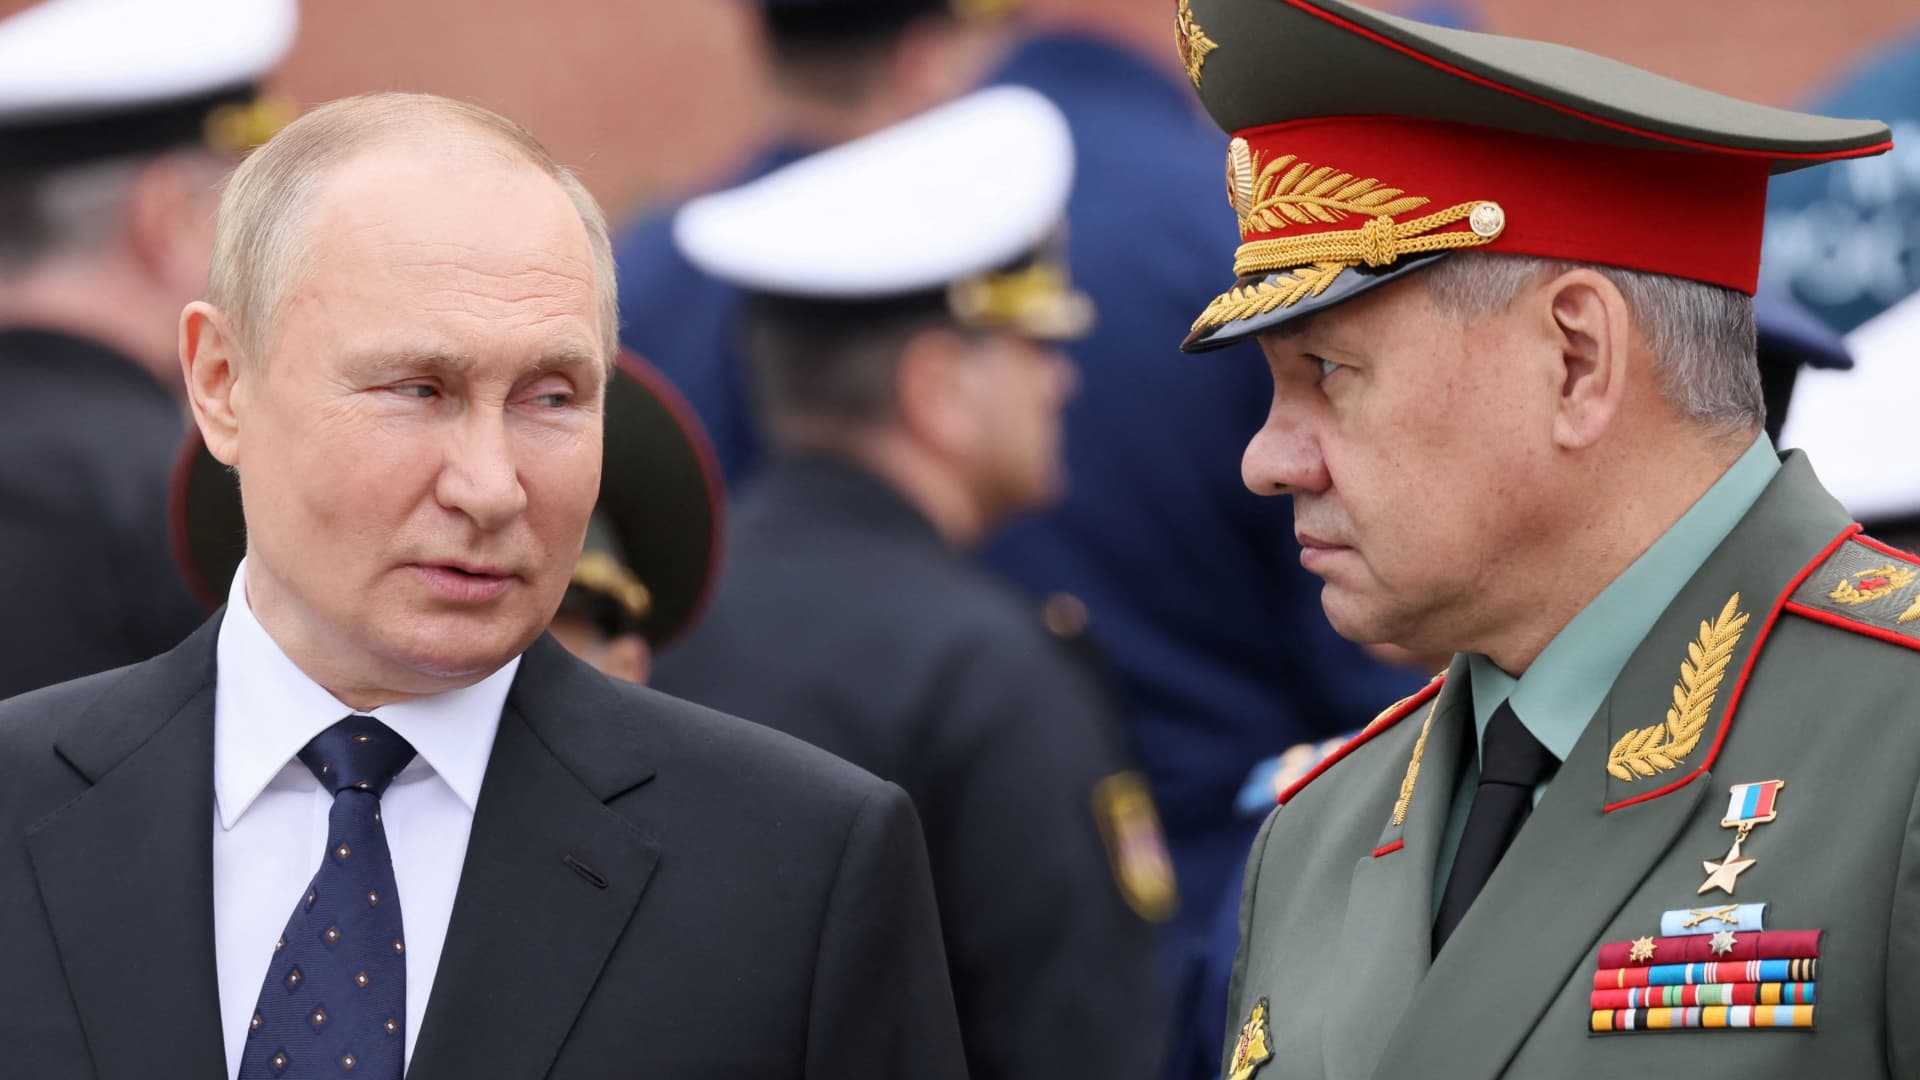 Russian President Vladimir Putin and Defense Minister Sergei Shoigu attend a wreath-laying ceremony, which marks the anniversary of the beginning of the Great Patriotic War against Nazi Germany in 1941, at the Tomb of the Unknown Soldier by the Kremlin wall in Moscow, Russia June 22, 2022.